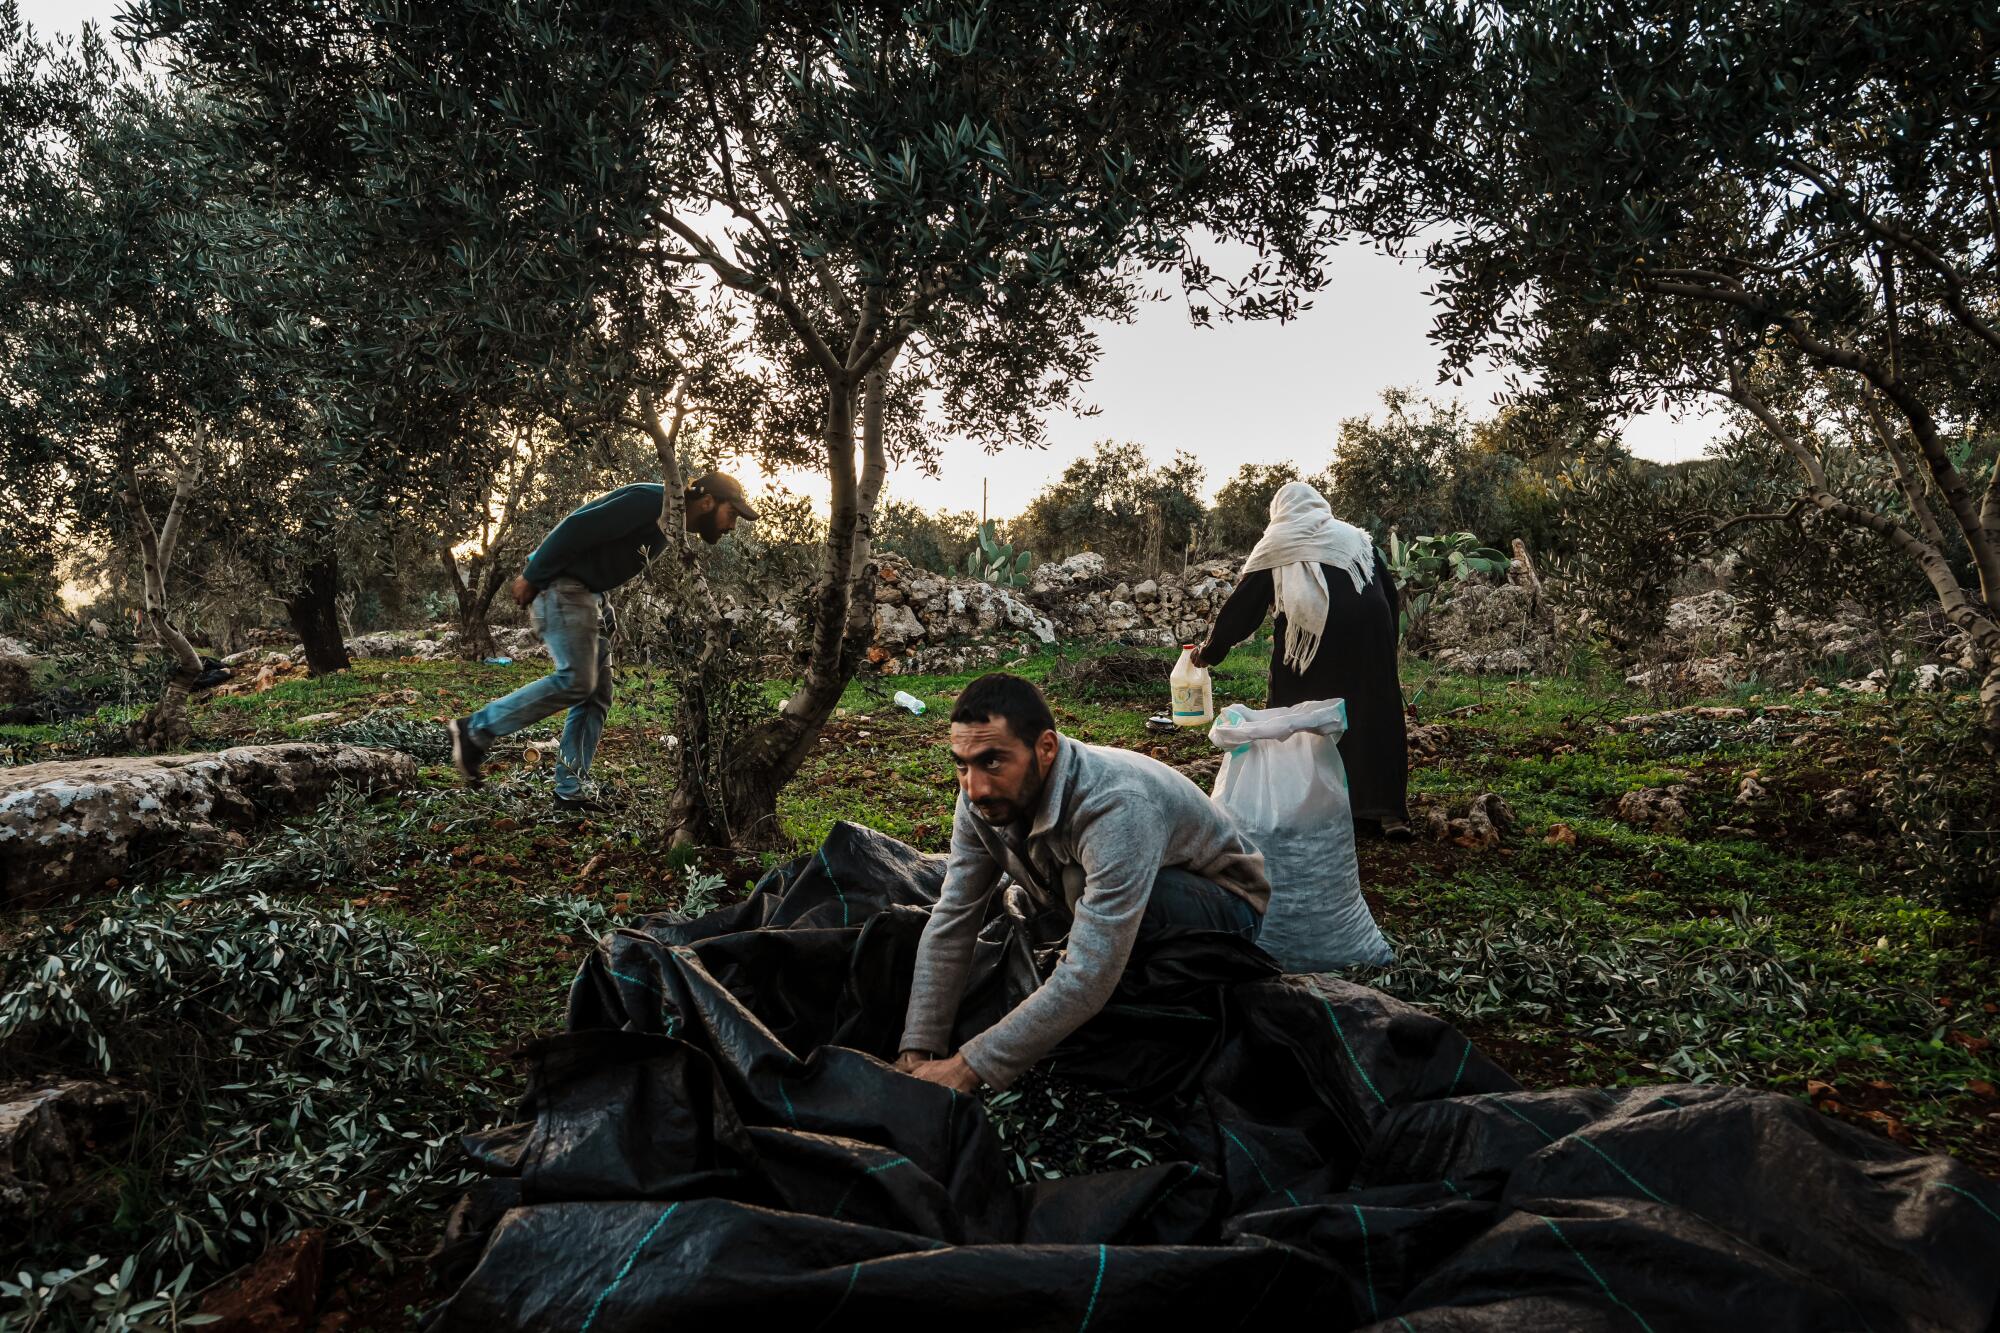 Nur abu Awad harvests olives and keeps an eye on the road passing through their family grove for Israeli patrol.